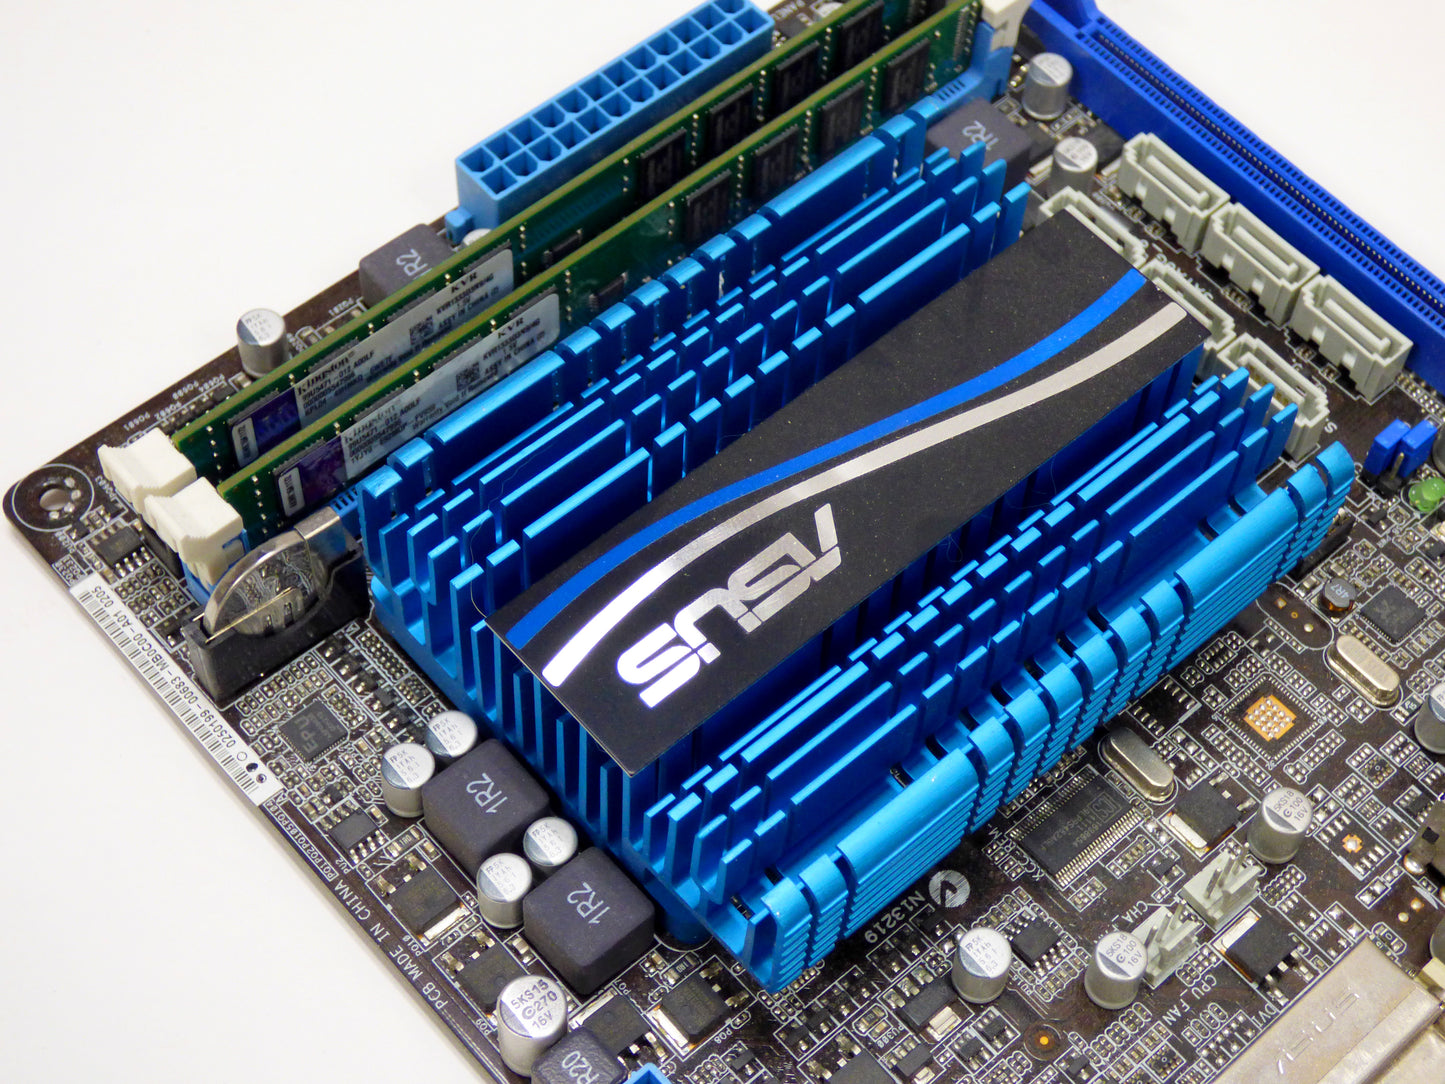 ASUS C60M1-I SATA 6Gb/s Motherboard Combo with 8GB DDR3 RAM